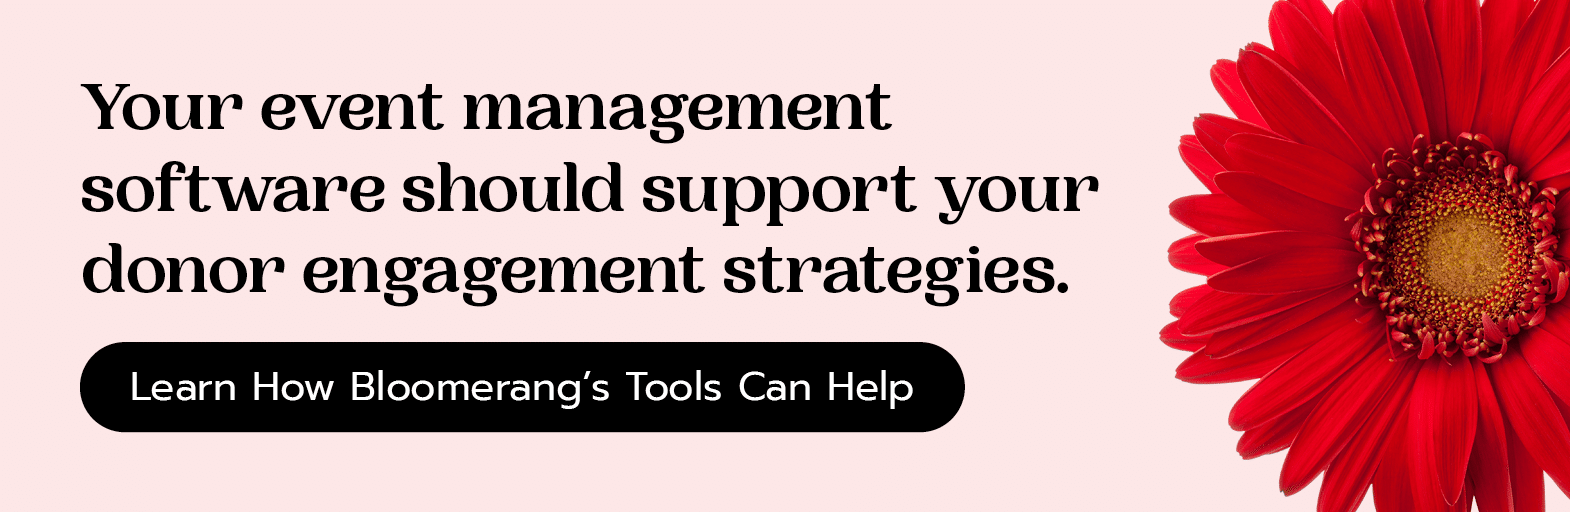 Your event management software should support your donor engagement strategies. Learn how Bloomerang’s tools can help.